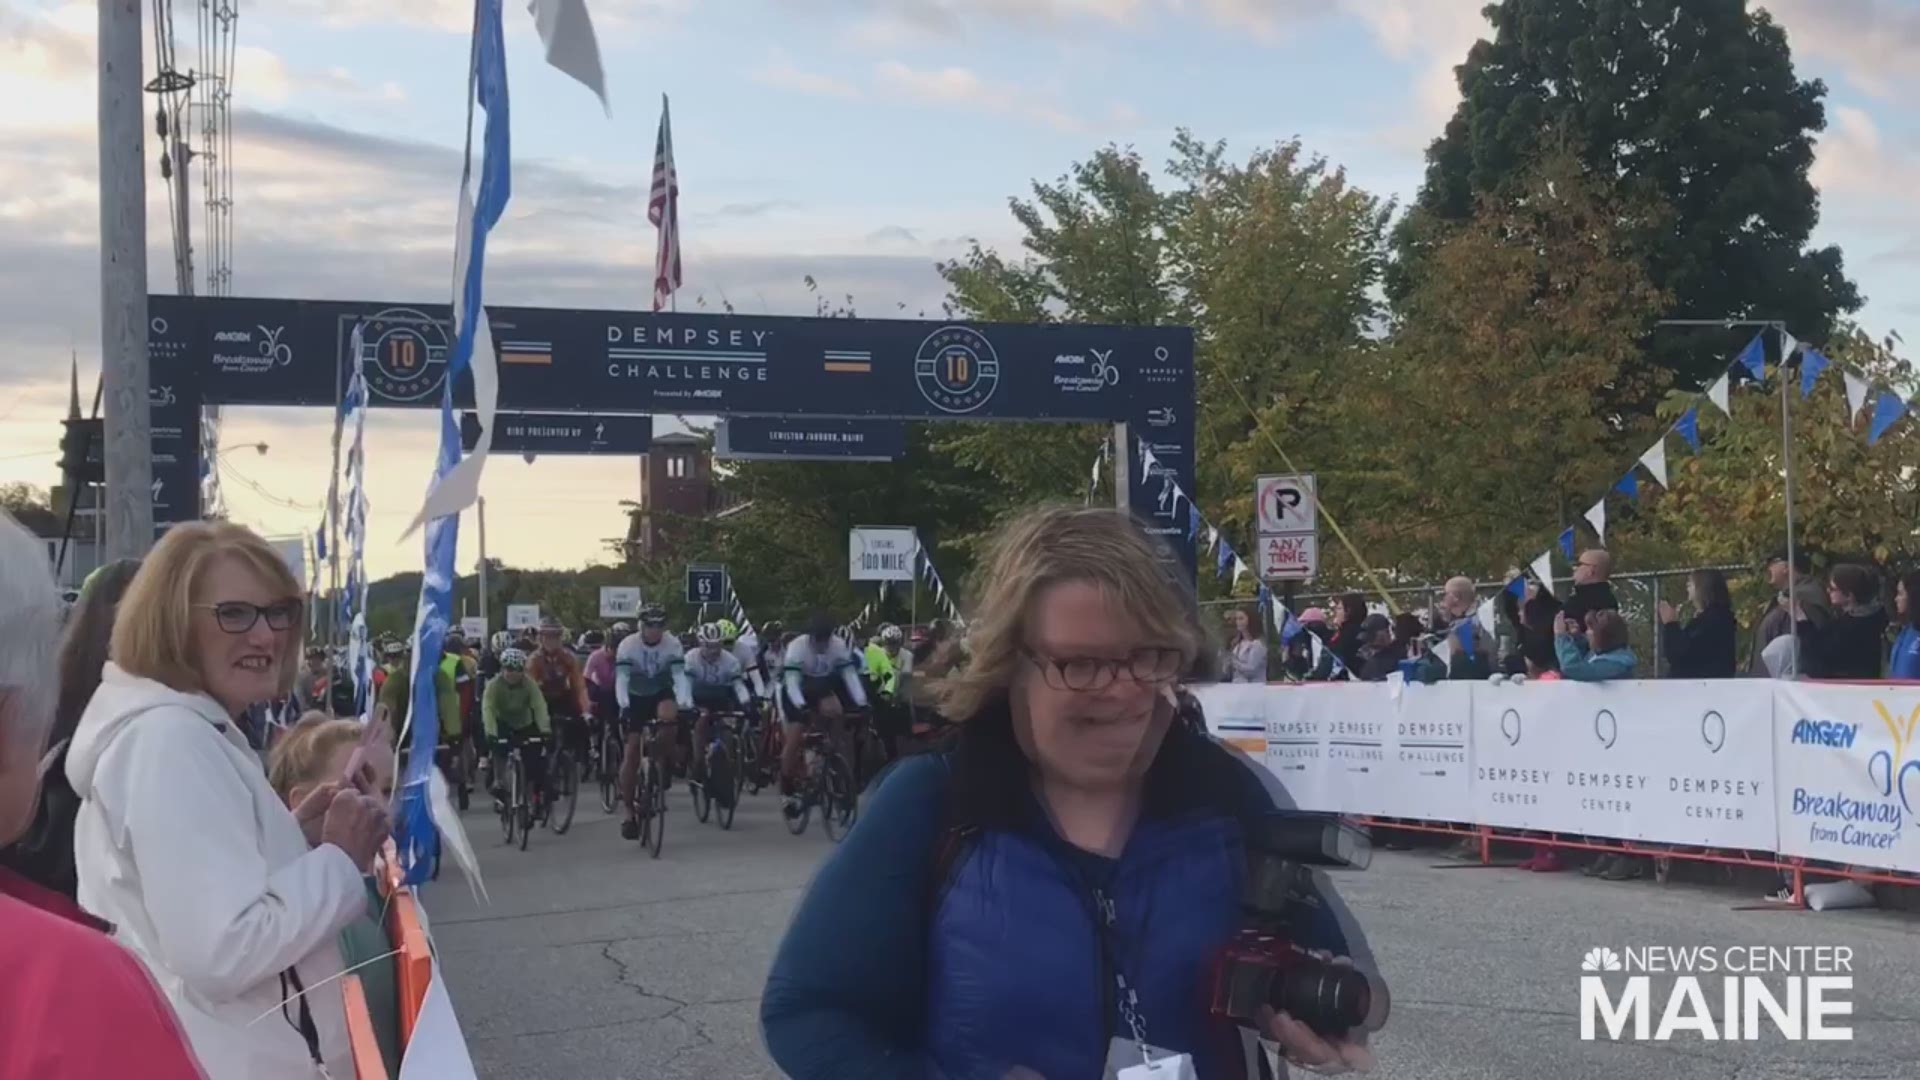 Patrick Dempsey and family lead start of 25-mile cycling group at 2018 Dempsey Challenge